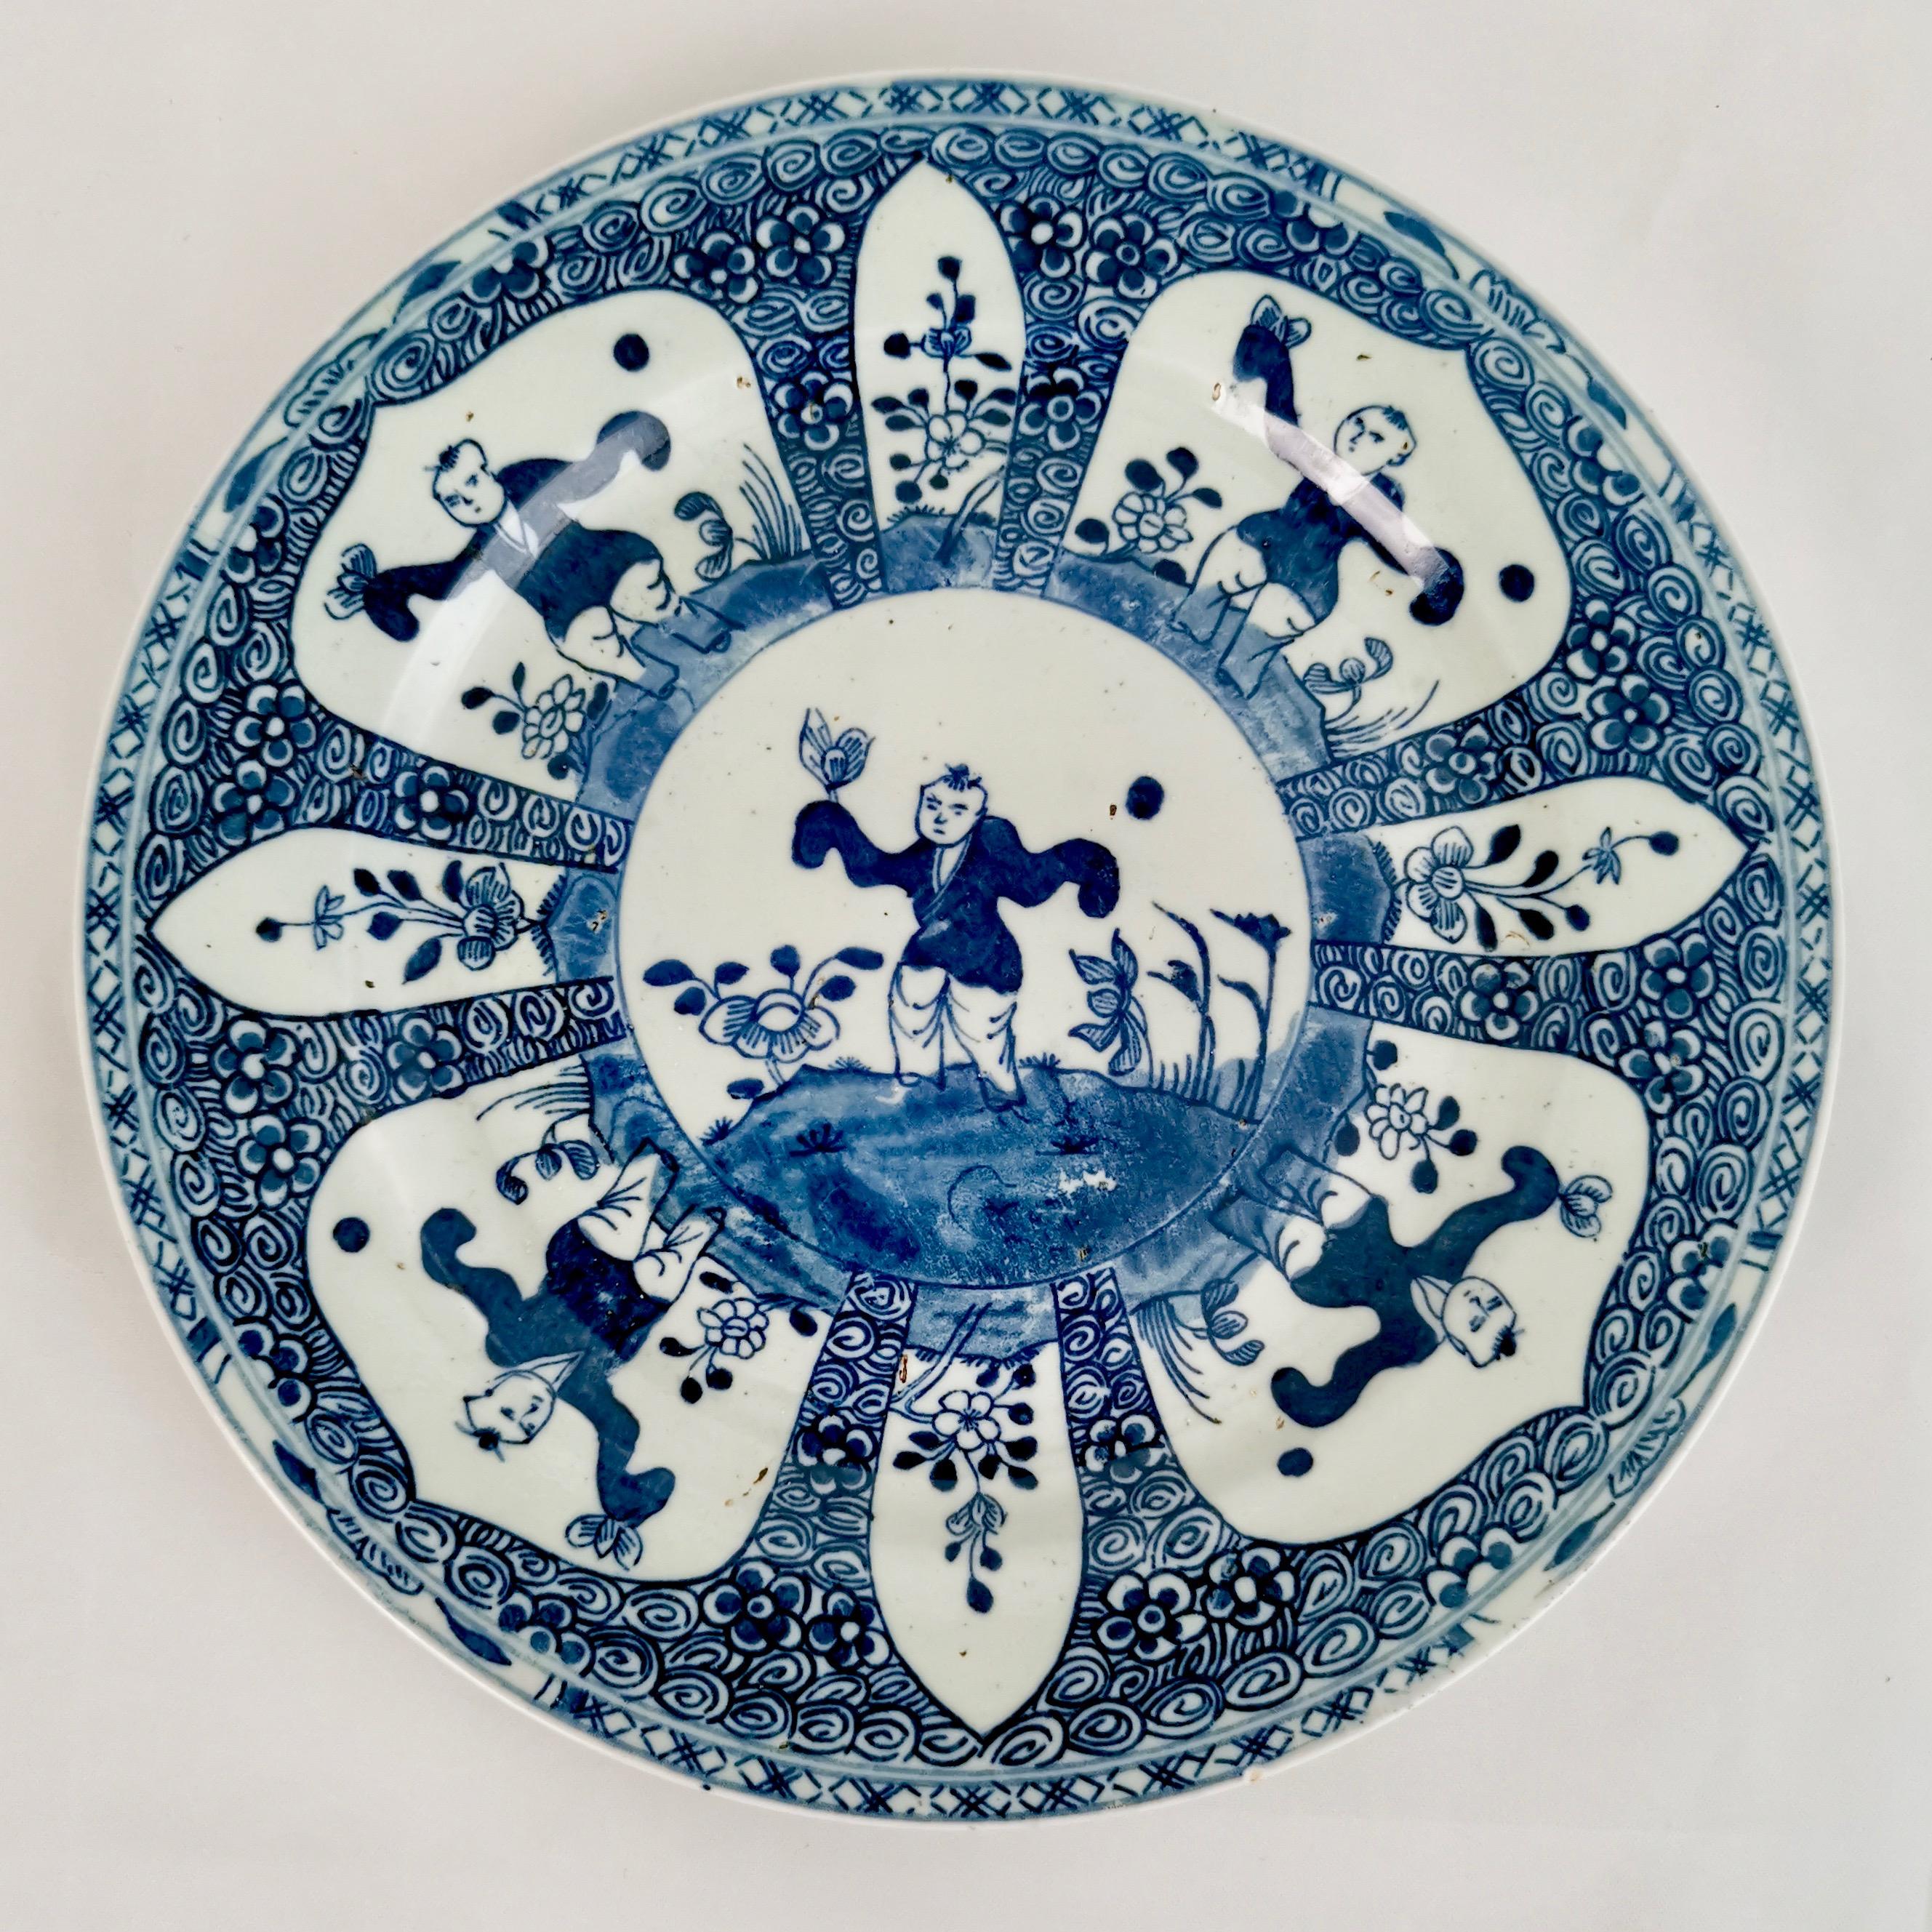 Porcelain Set of 5 Chinese Export Plates, Blue and White, Boy with Butterfly, 19th Century